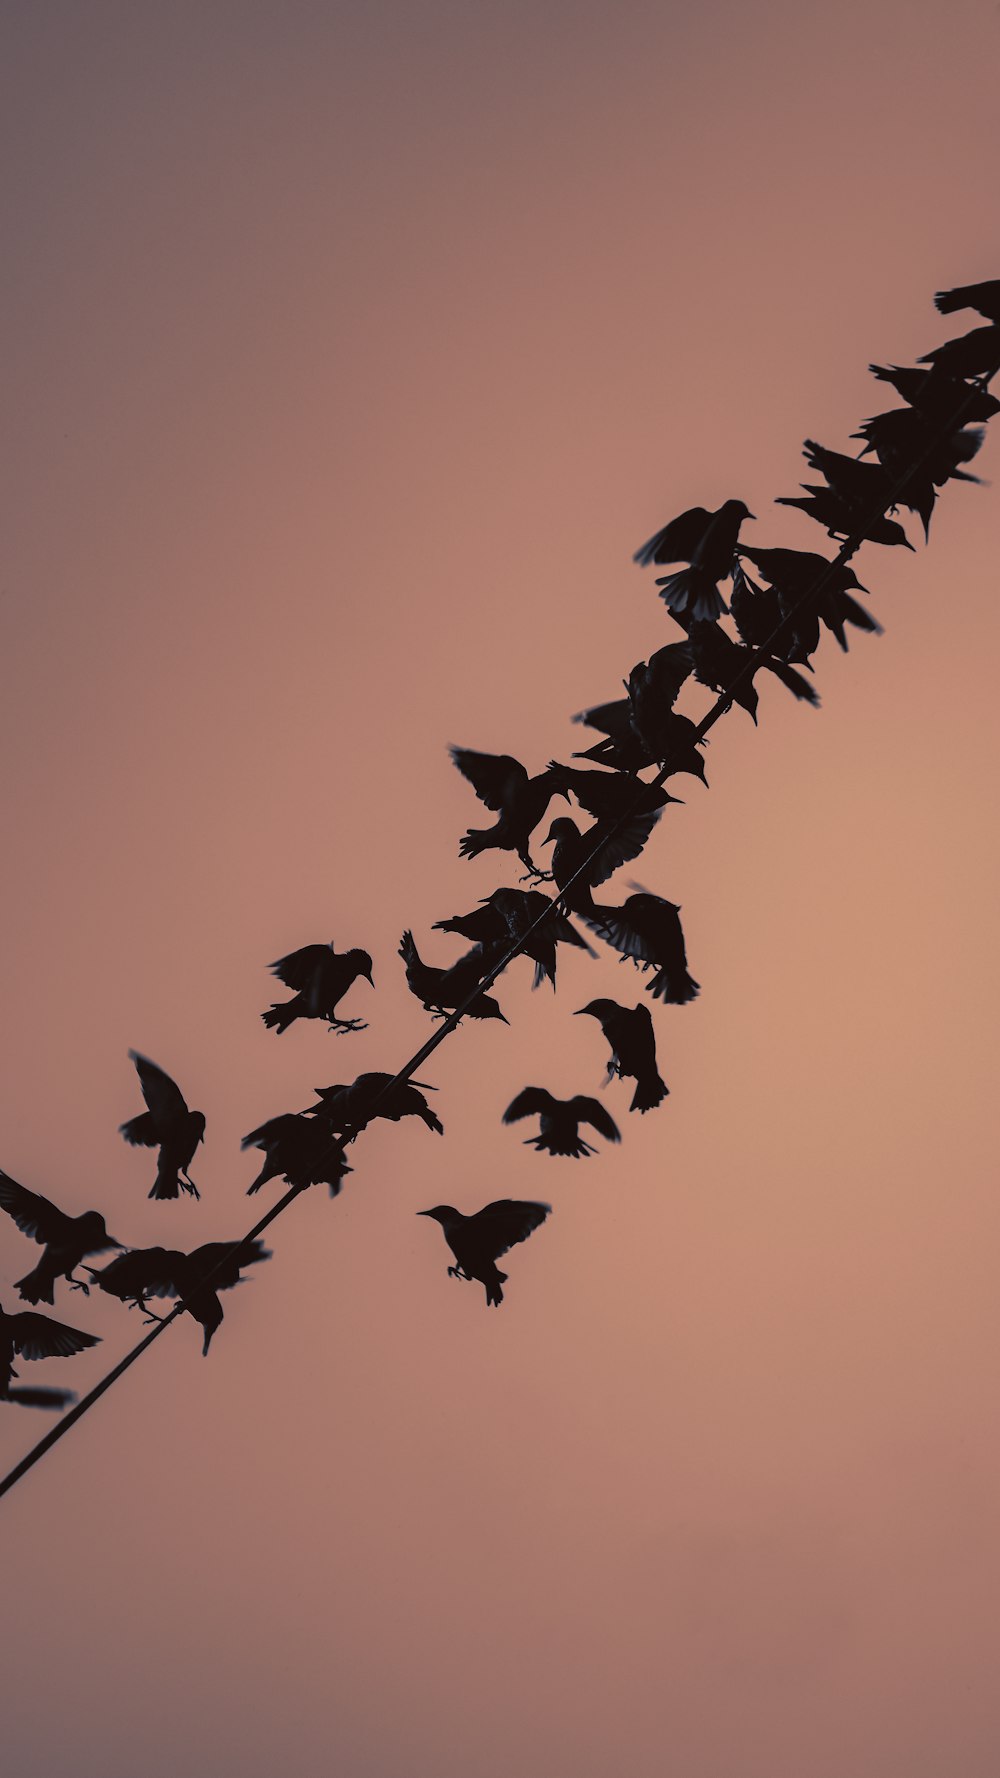 silhouette of birds flying during daytime